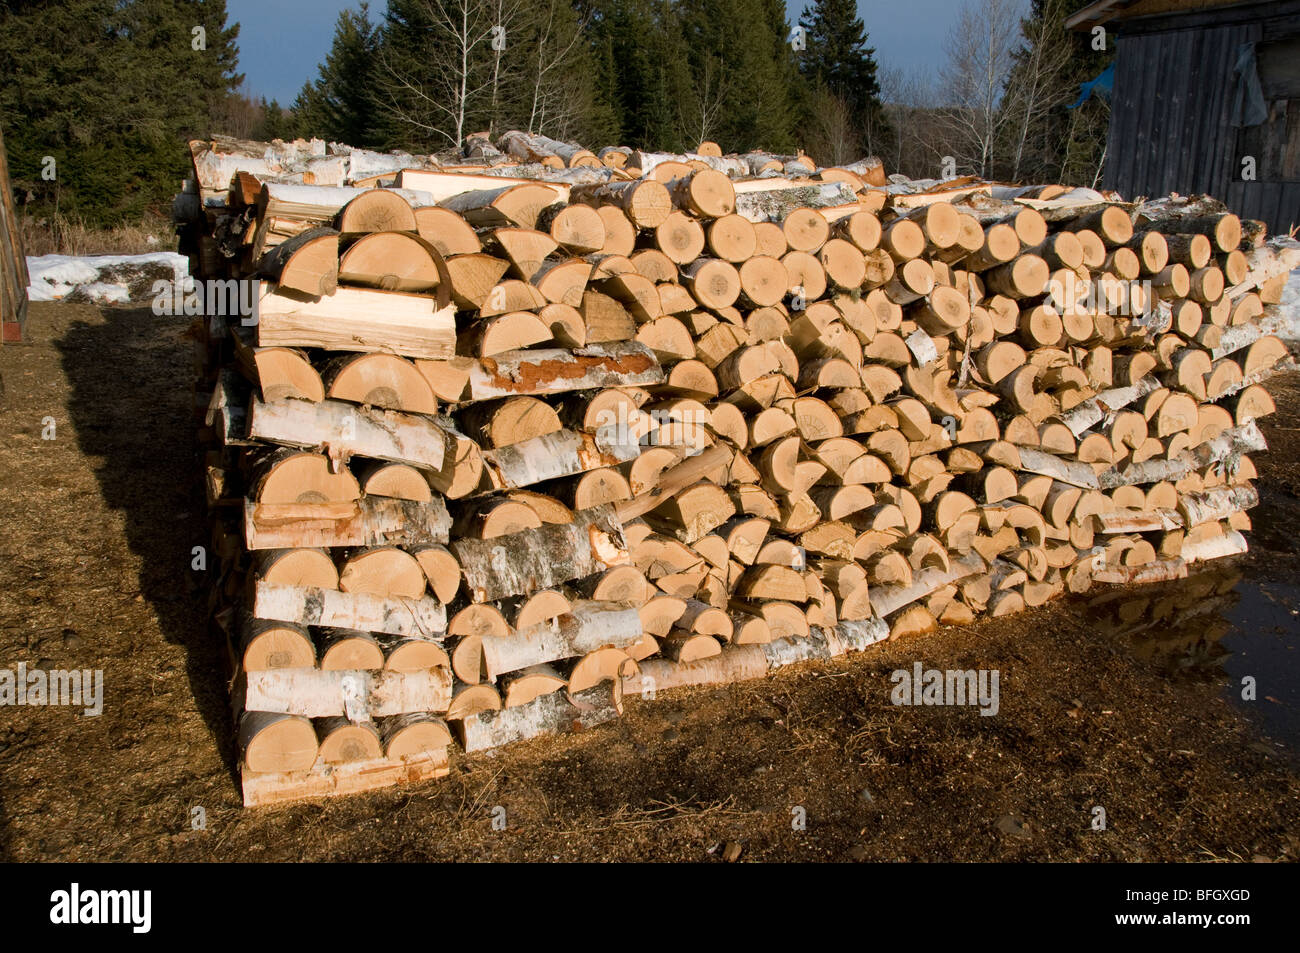 Neatly stacked pile of firewood cut from birch trees, Ontario, Canada Stock Photo